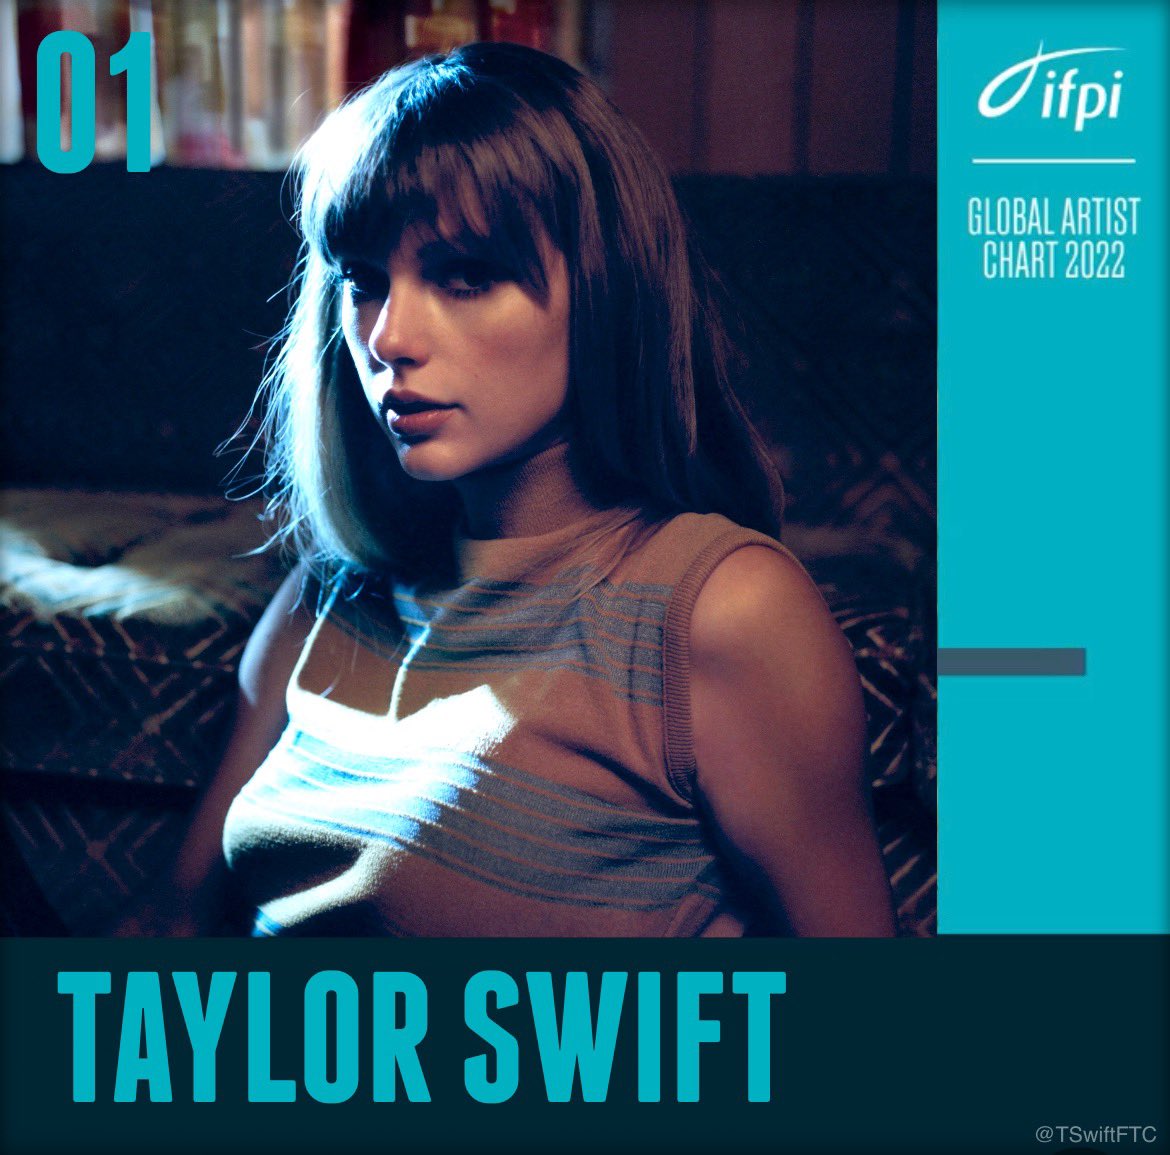 🏆 According to IFPI, Taylor Swift is officially crowned as the #1 best selling global artist of 2022, thanks to the success of “Midnights”. 

It is her 3rd award won in this category. #GlobalArtistChart